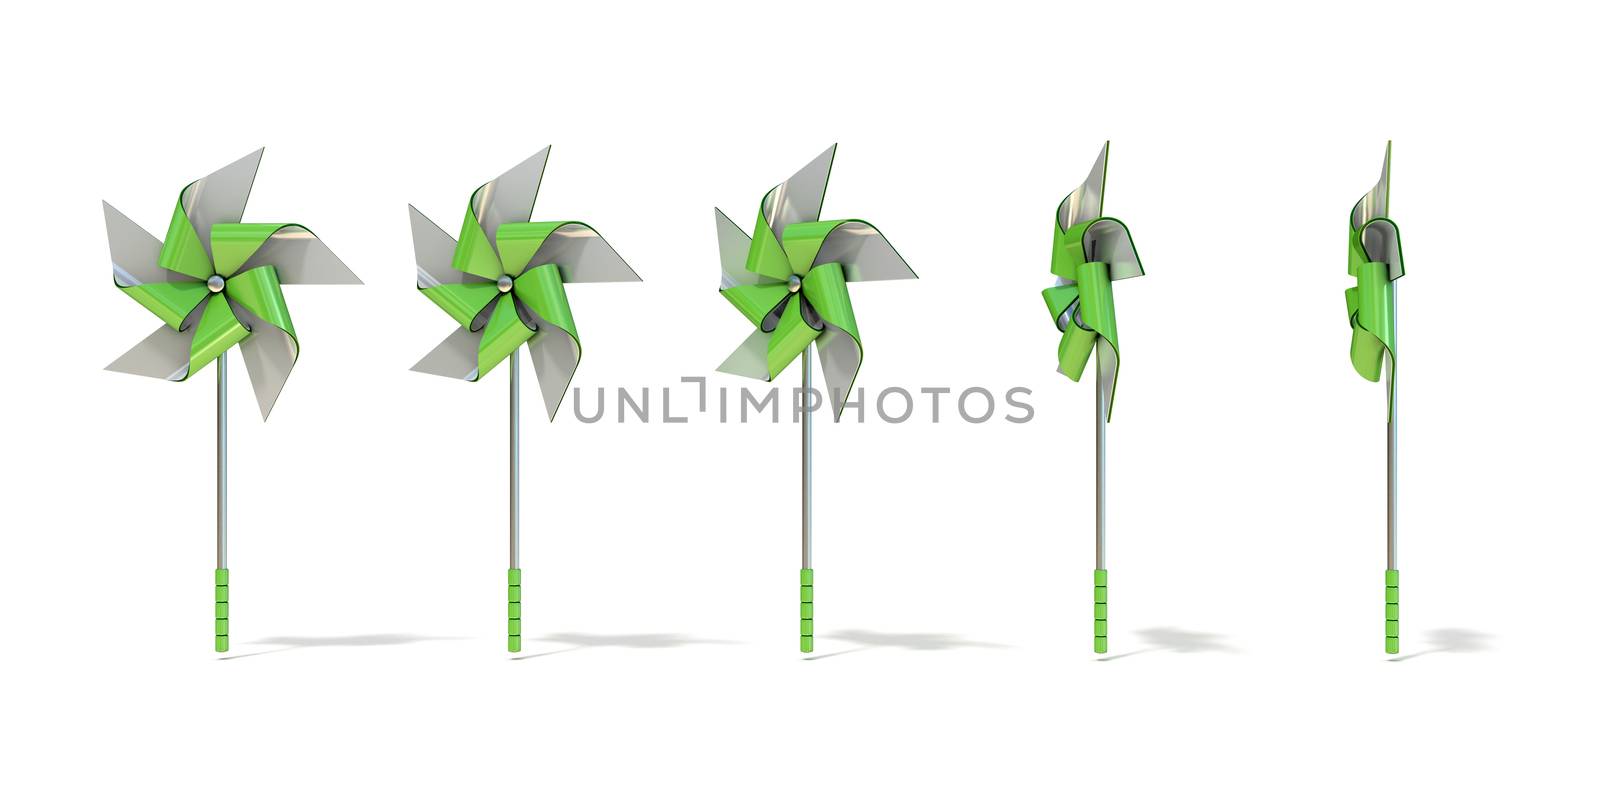 Five angles views of five sided pinwheel. 3D render illustration isolated on white background